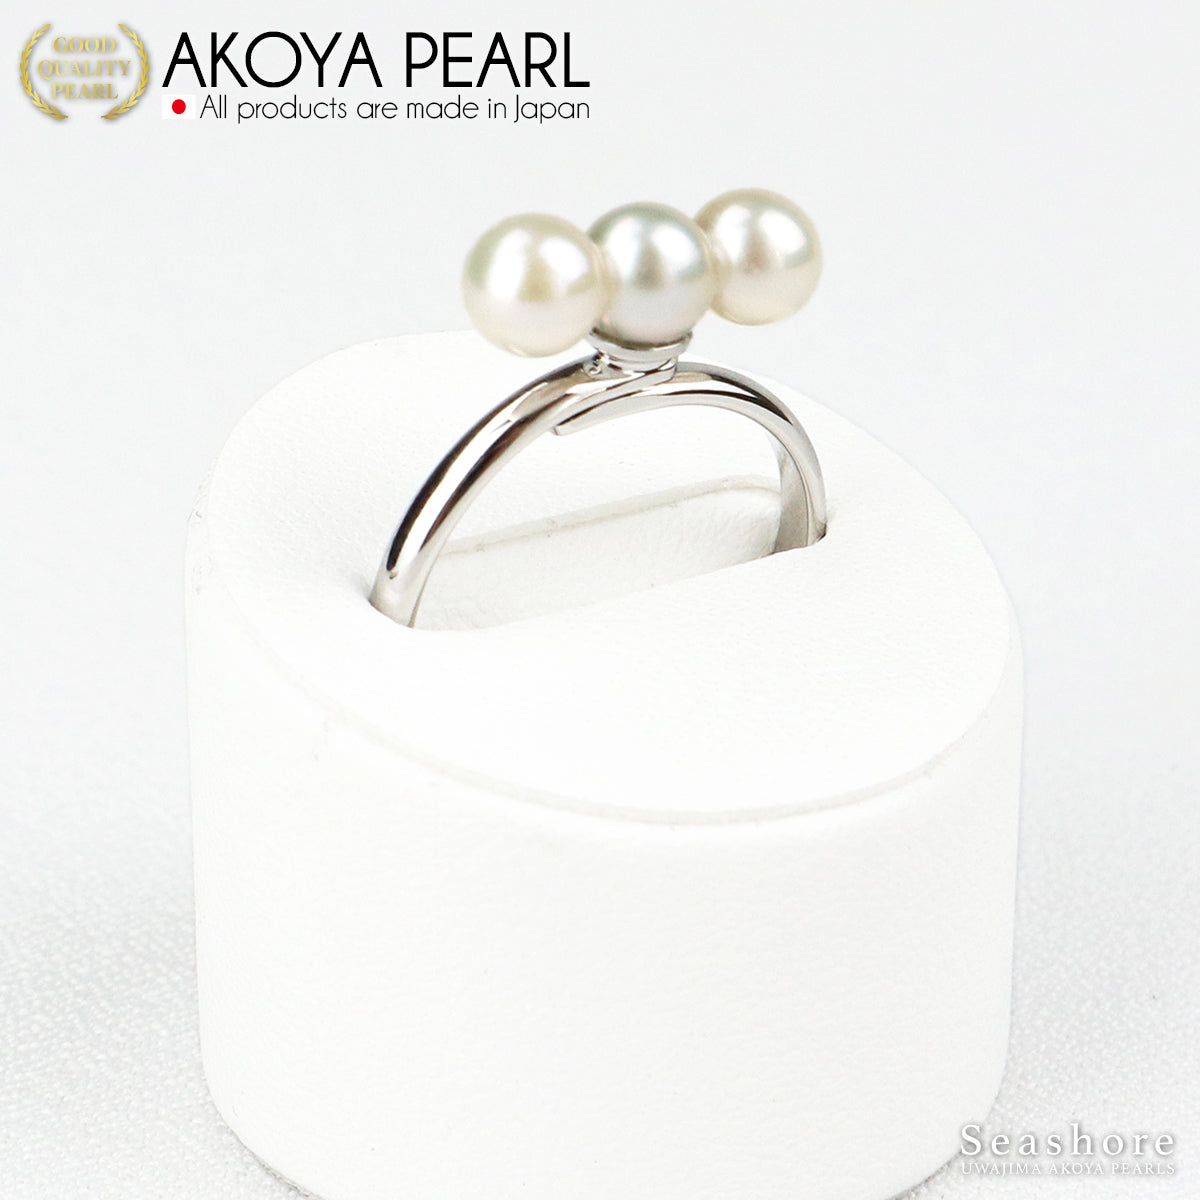 3 beads pearl ring free size 5.0-5.5mm Akoya pearl 2 colors brass silver / gold bar ring